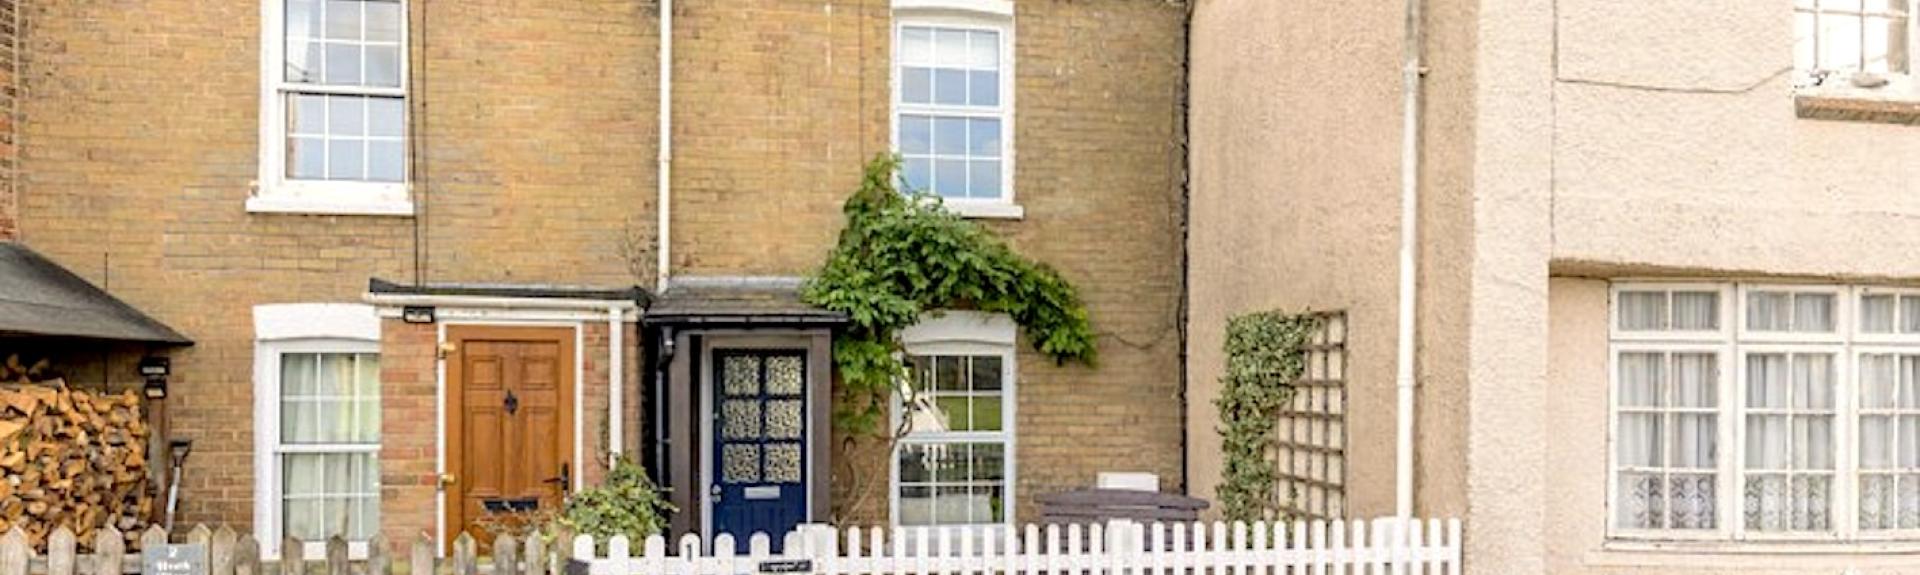 A stone-built terraced cottage with a front garden behind a picket fence.